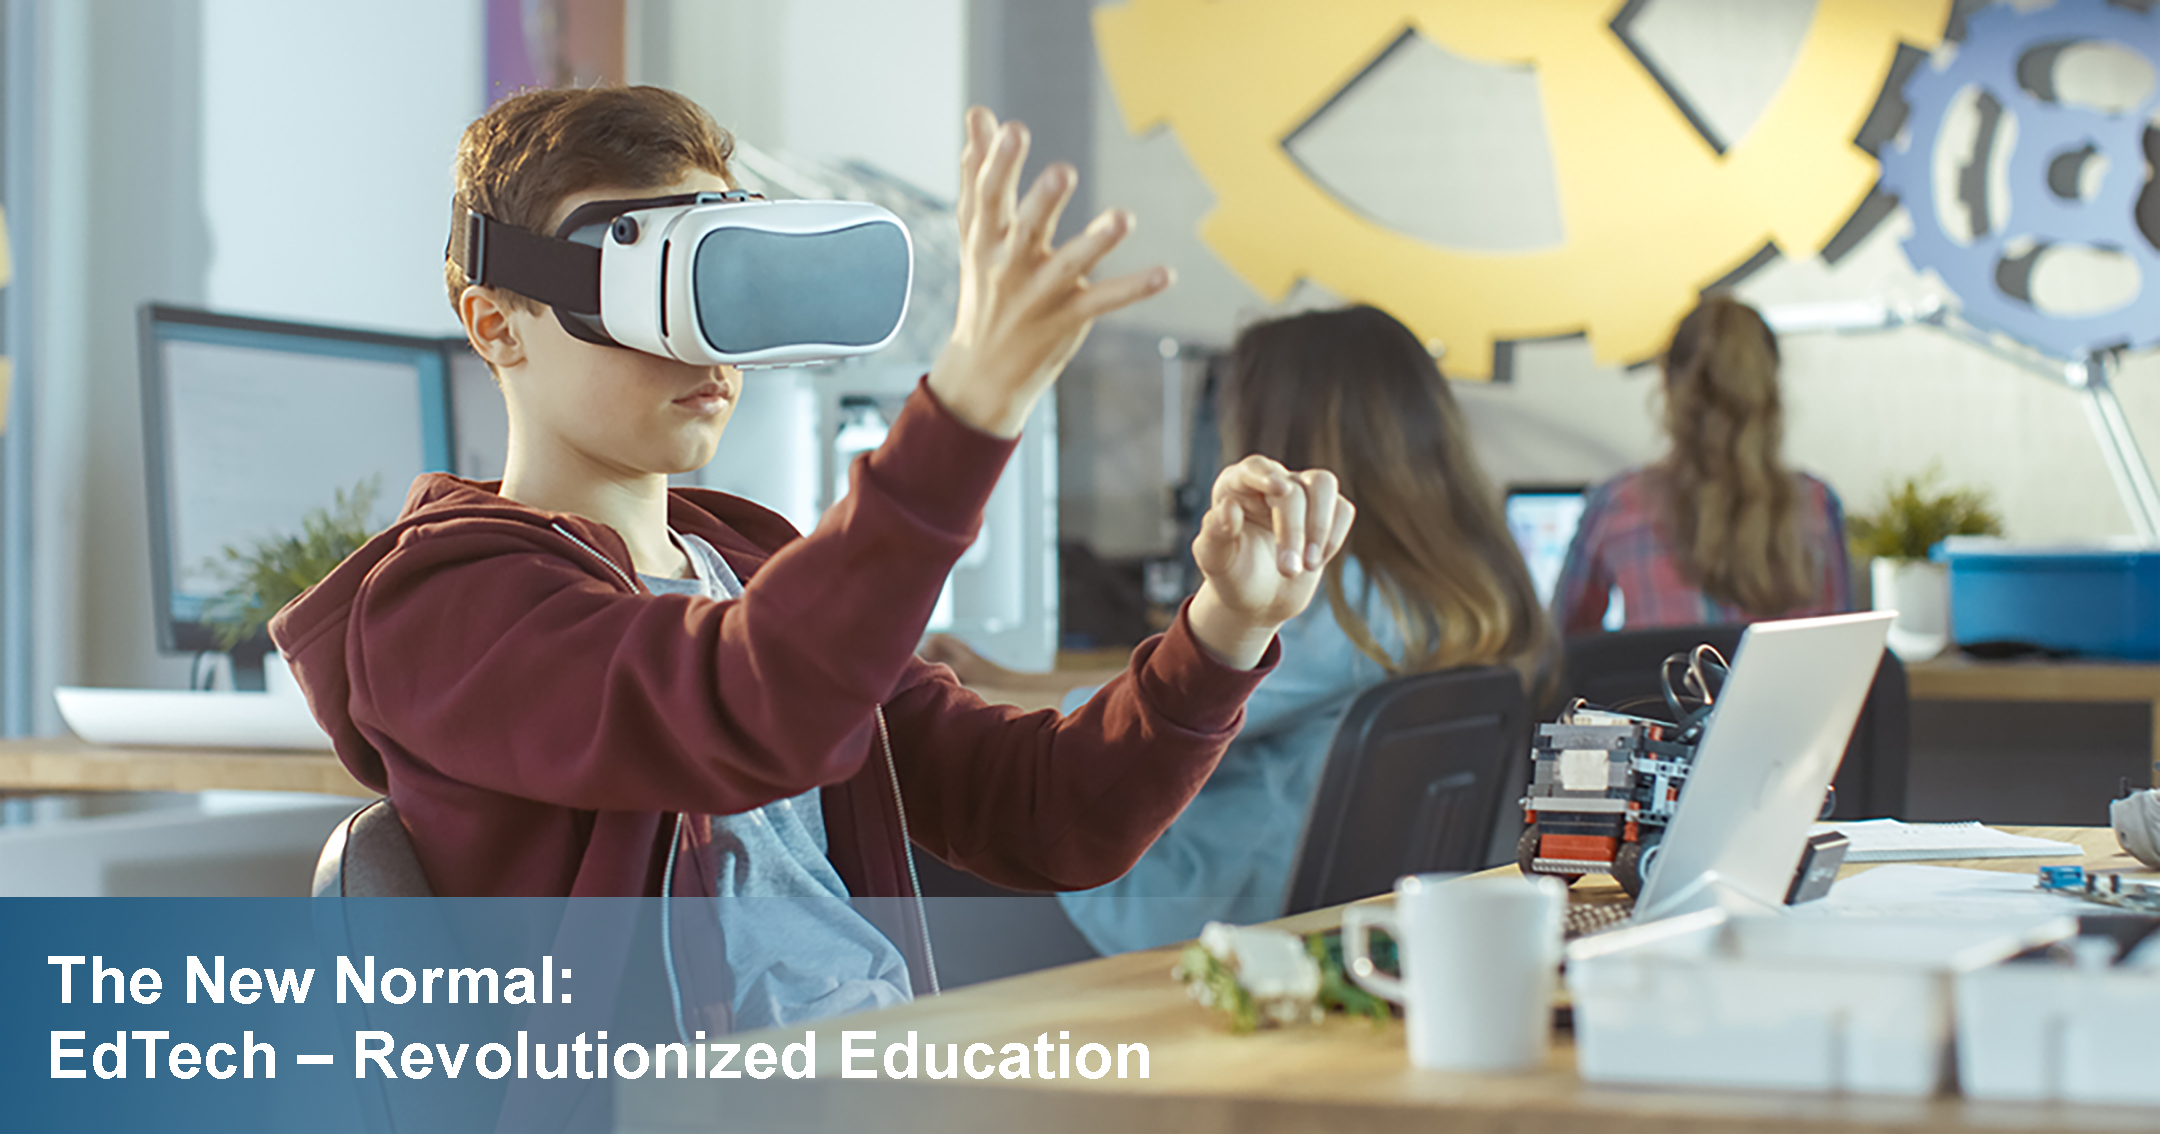 The New Normal: EdTech – Revolutionized Education